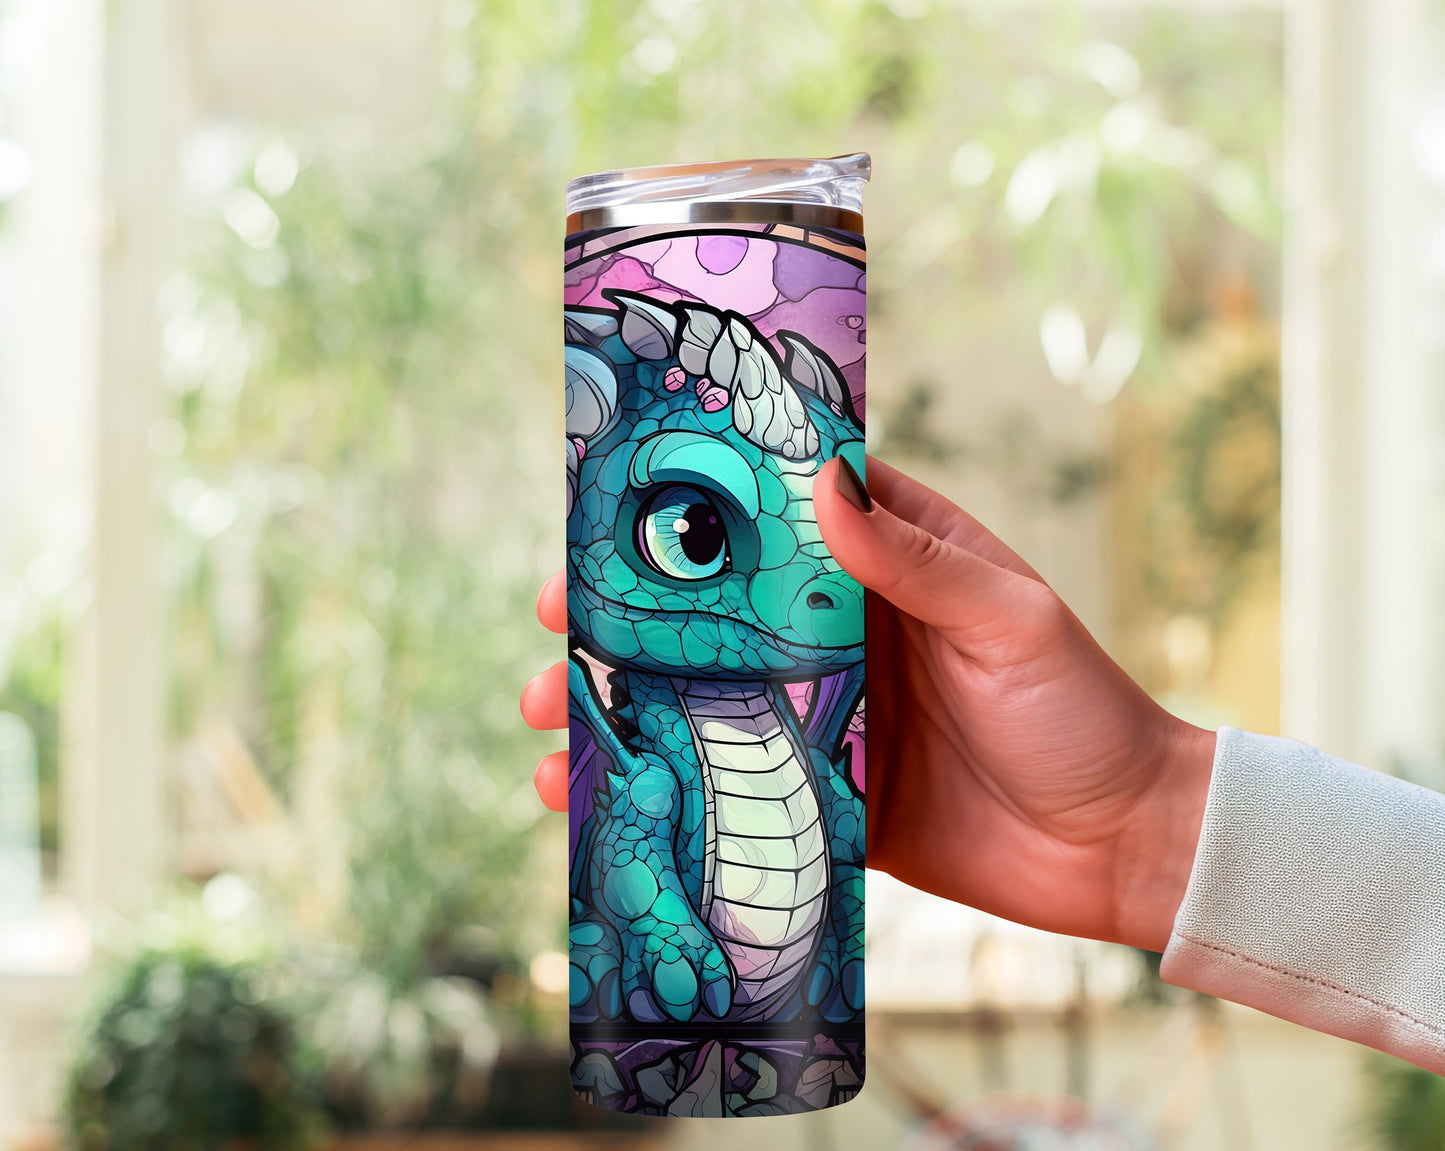 Dragon Enigma 20oz Tumbler - Customizable Mysterious Character-Themed Travel Cup - Perfect for Fans of Whimsical Stained Glass Design